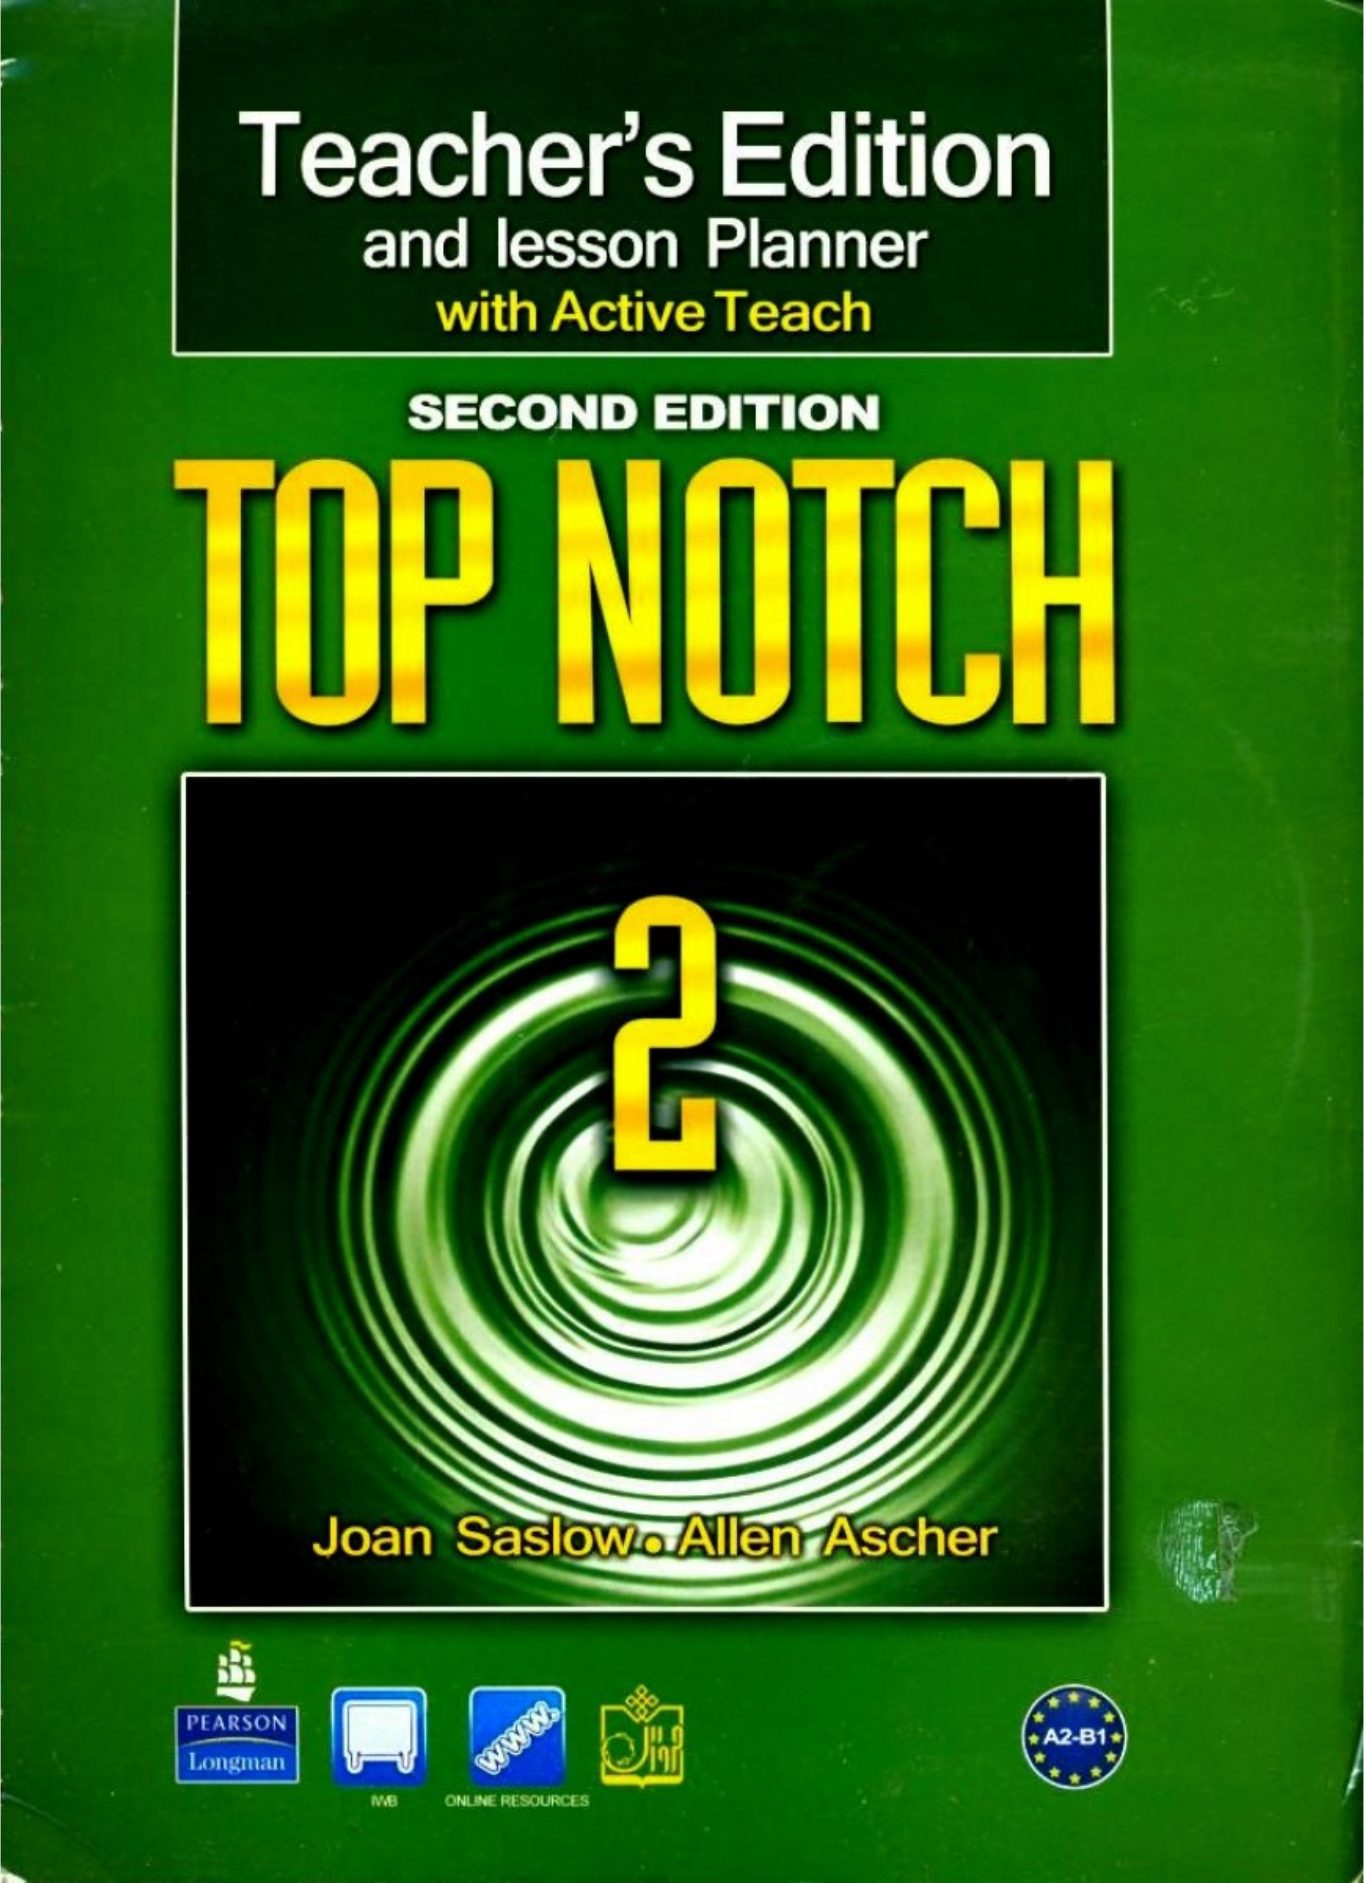 Rich Results on Google's SERP when searching for 'Top Notch Teachers Book 2'